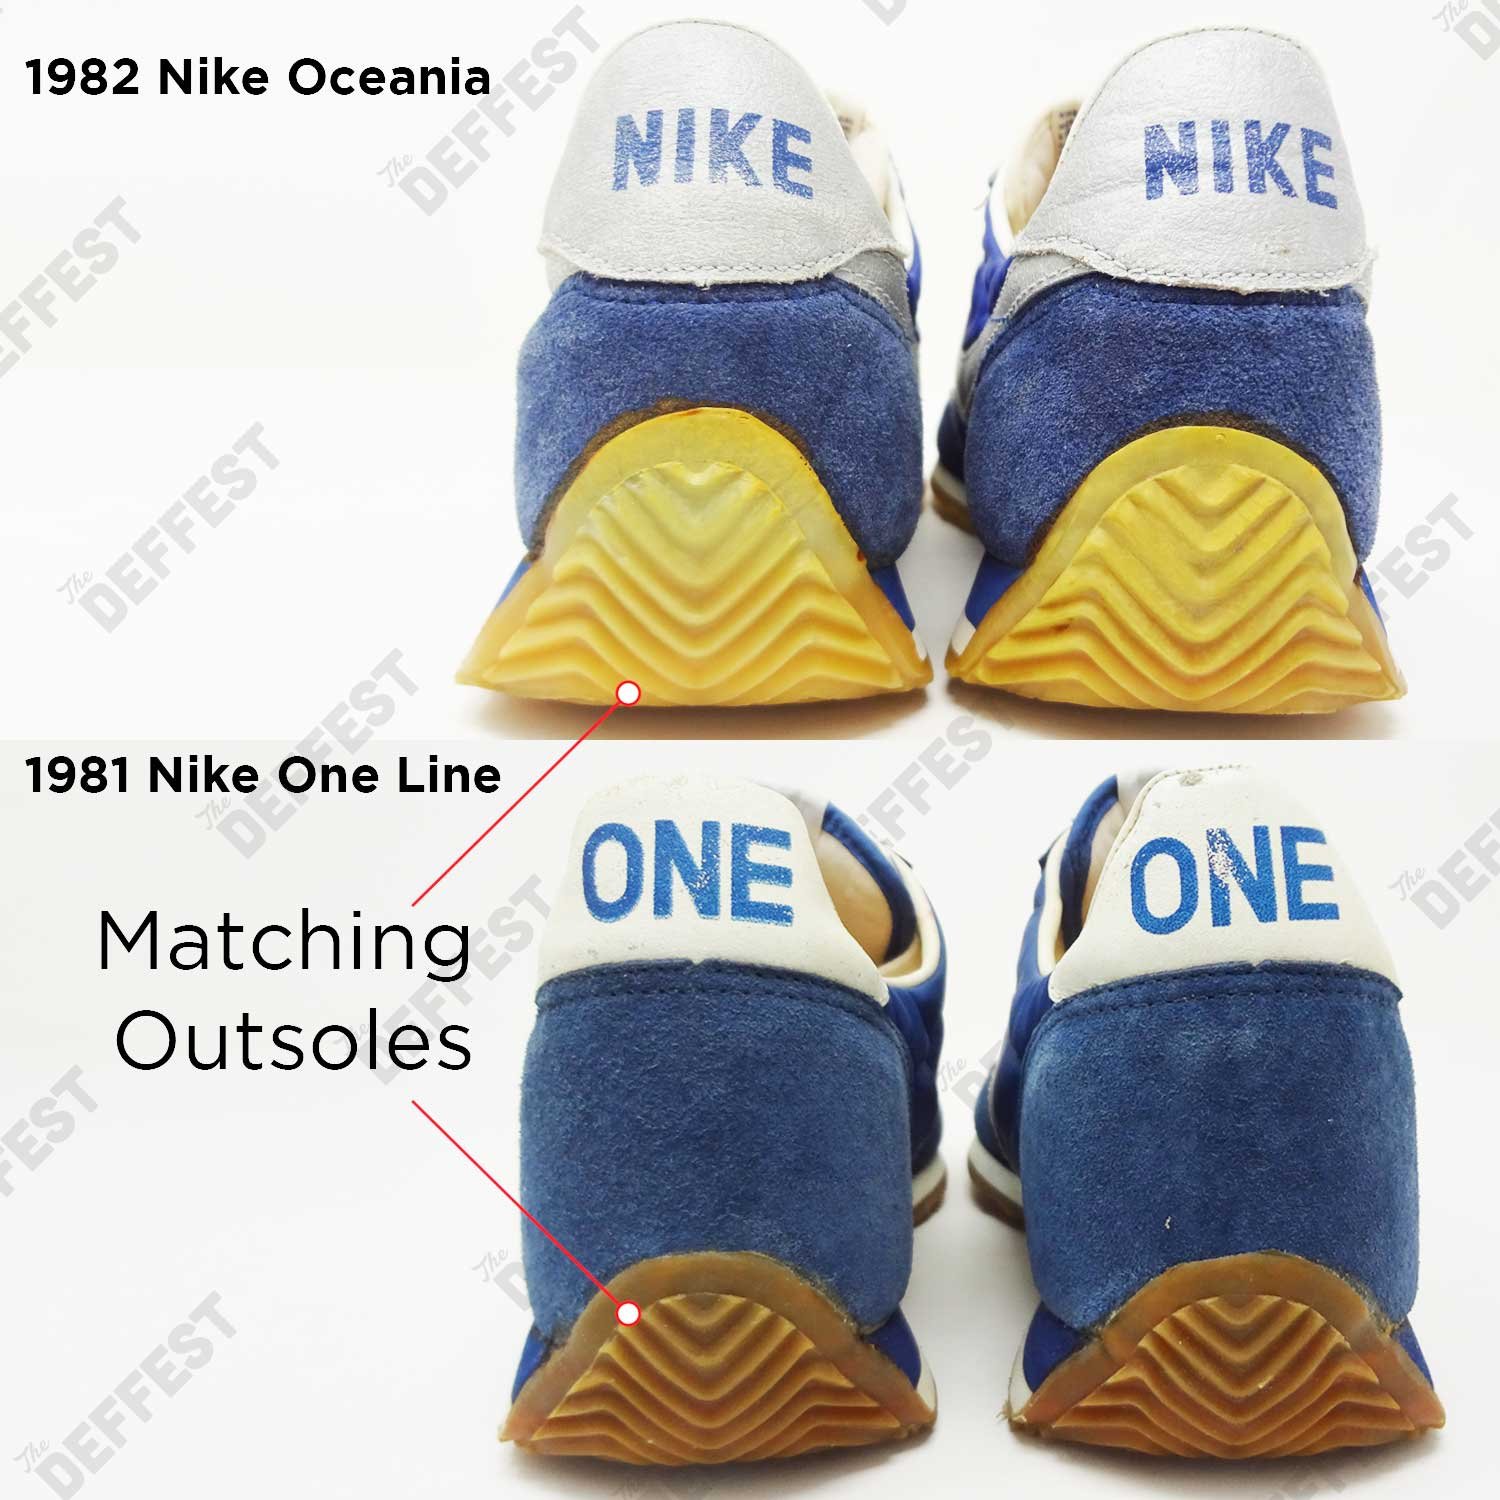 The Rarest Nike Sneakers Ever - The One Line / Nike Oceania comparison photos